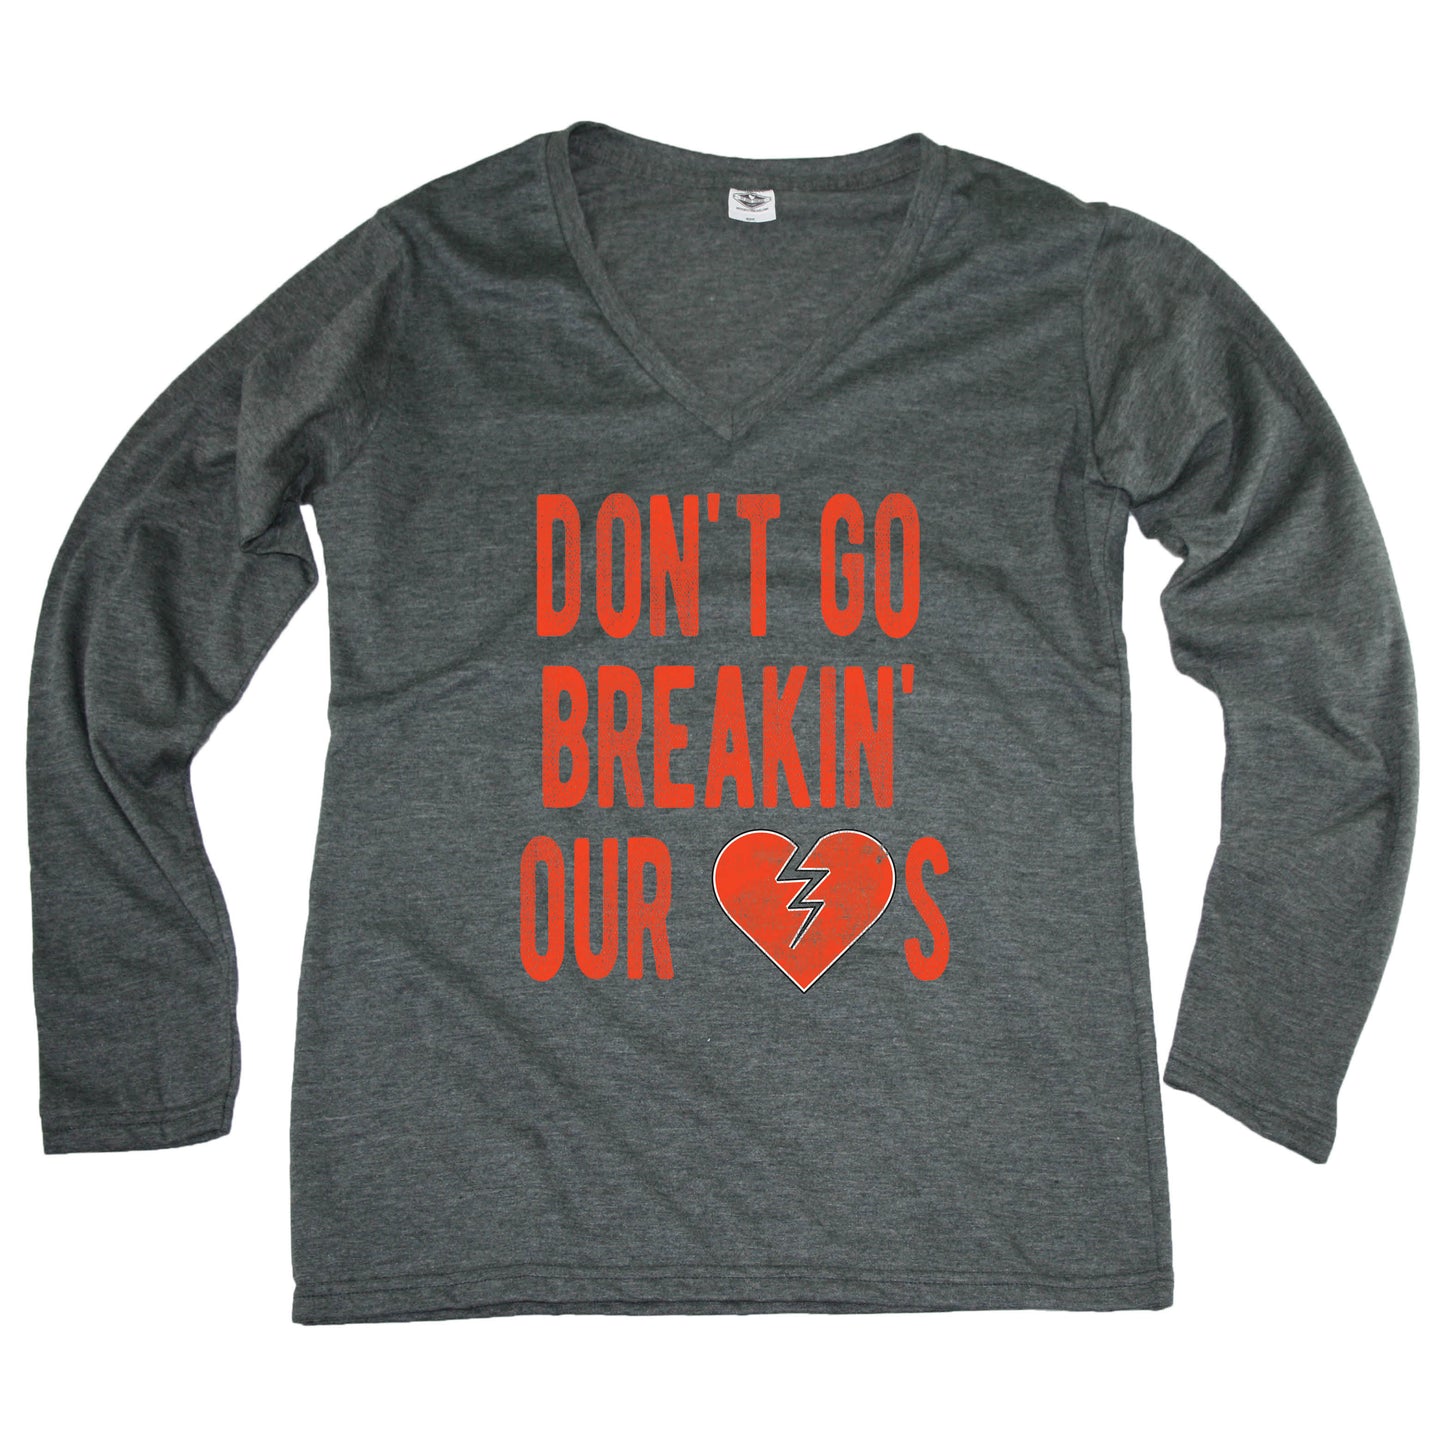 Don't Go Breaking Our Hearts - Cleveland - Ladies' Longsleeve